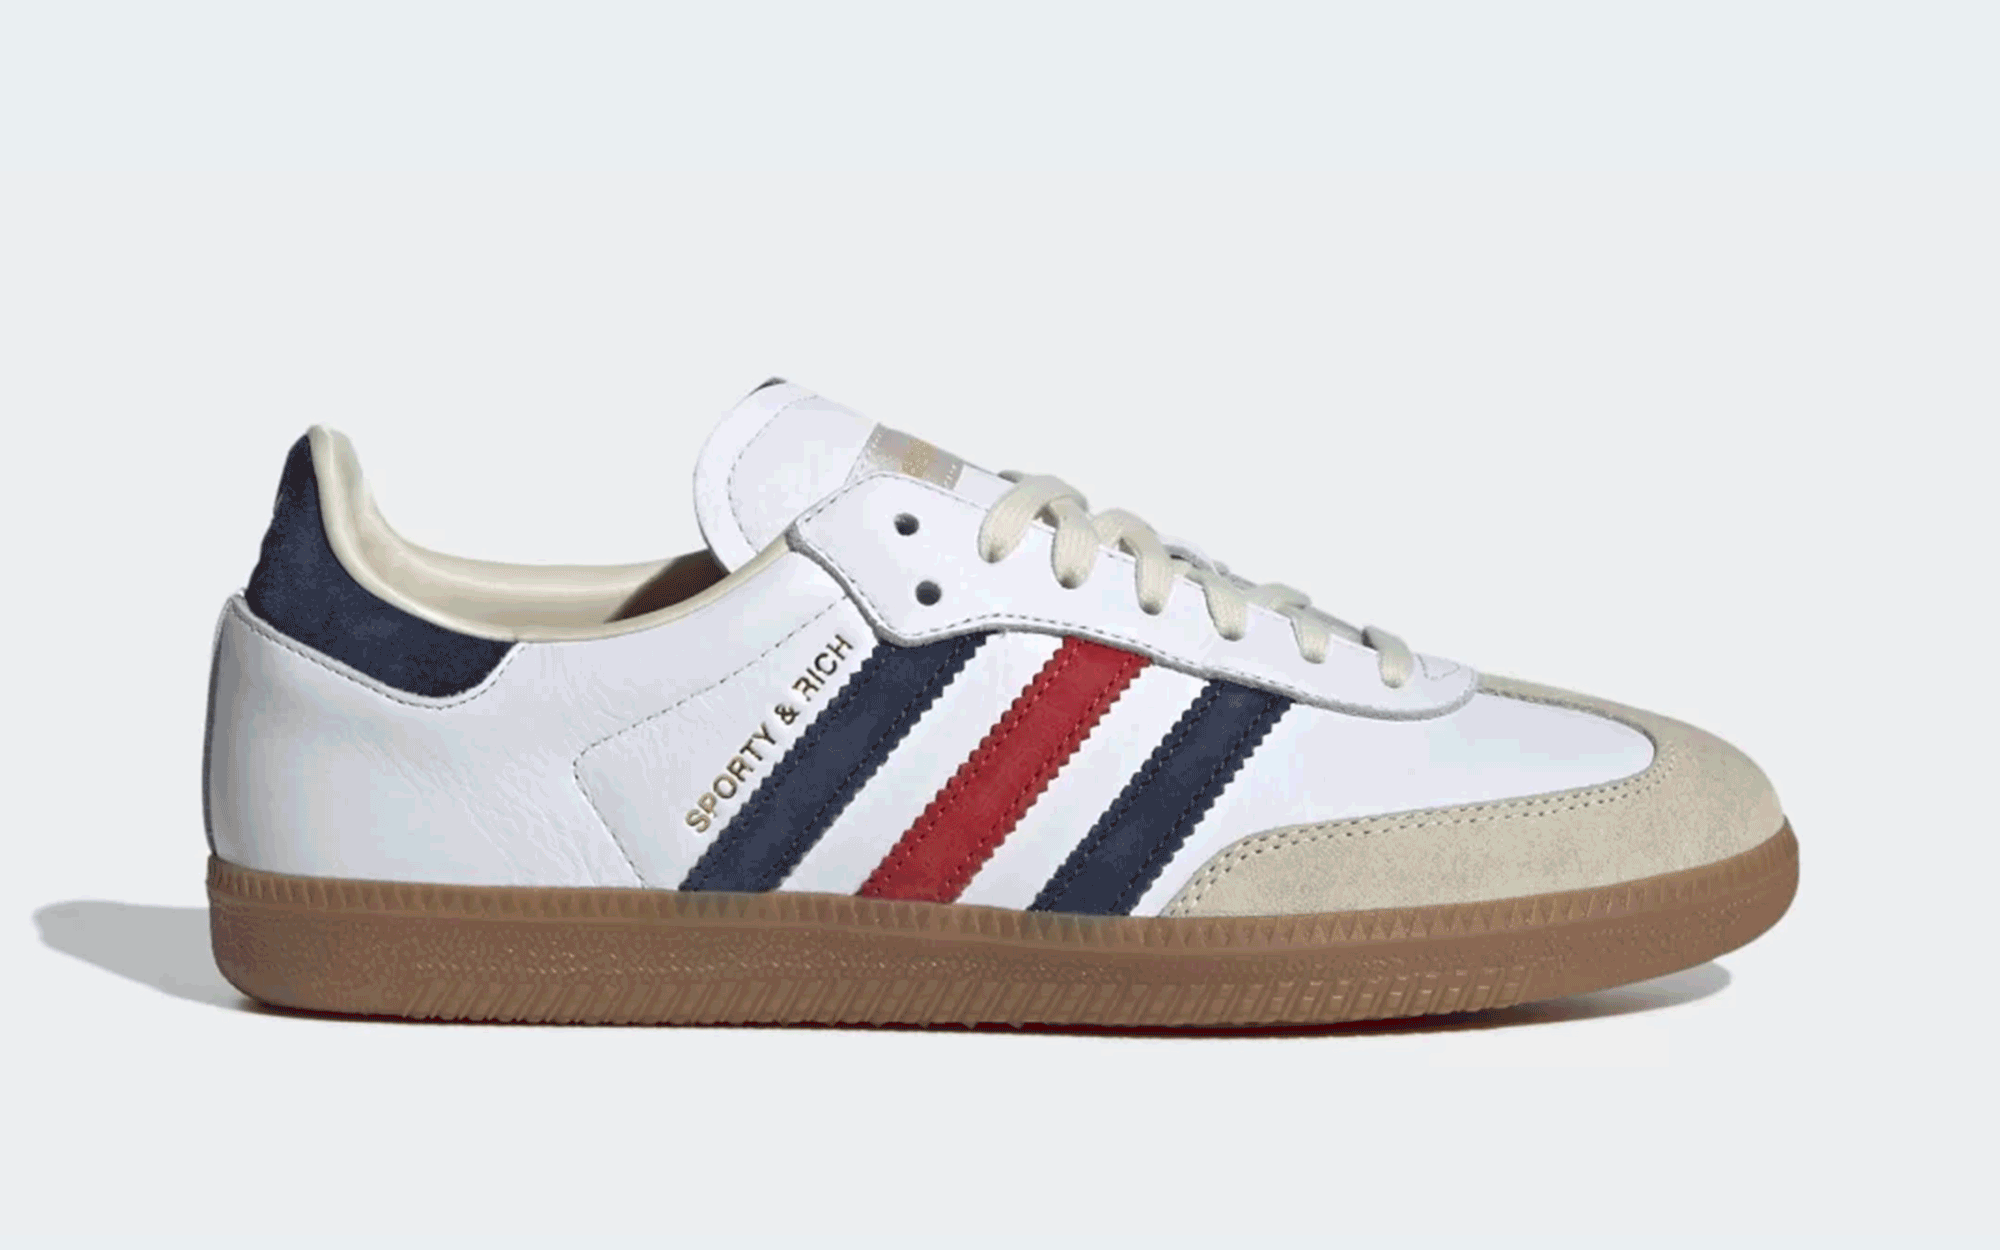 The Sporty & Rich x Adidas "Olympic" Collection Releases This Fall